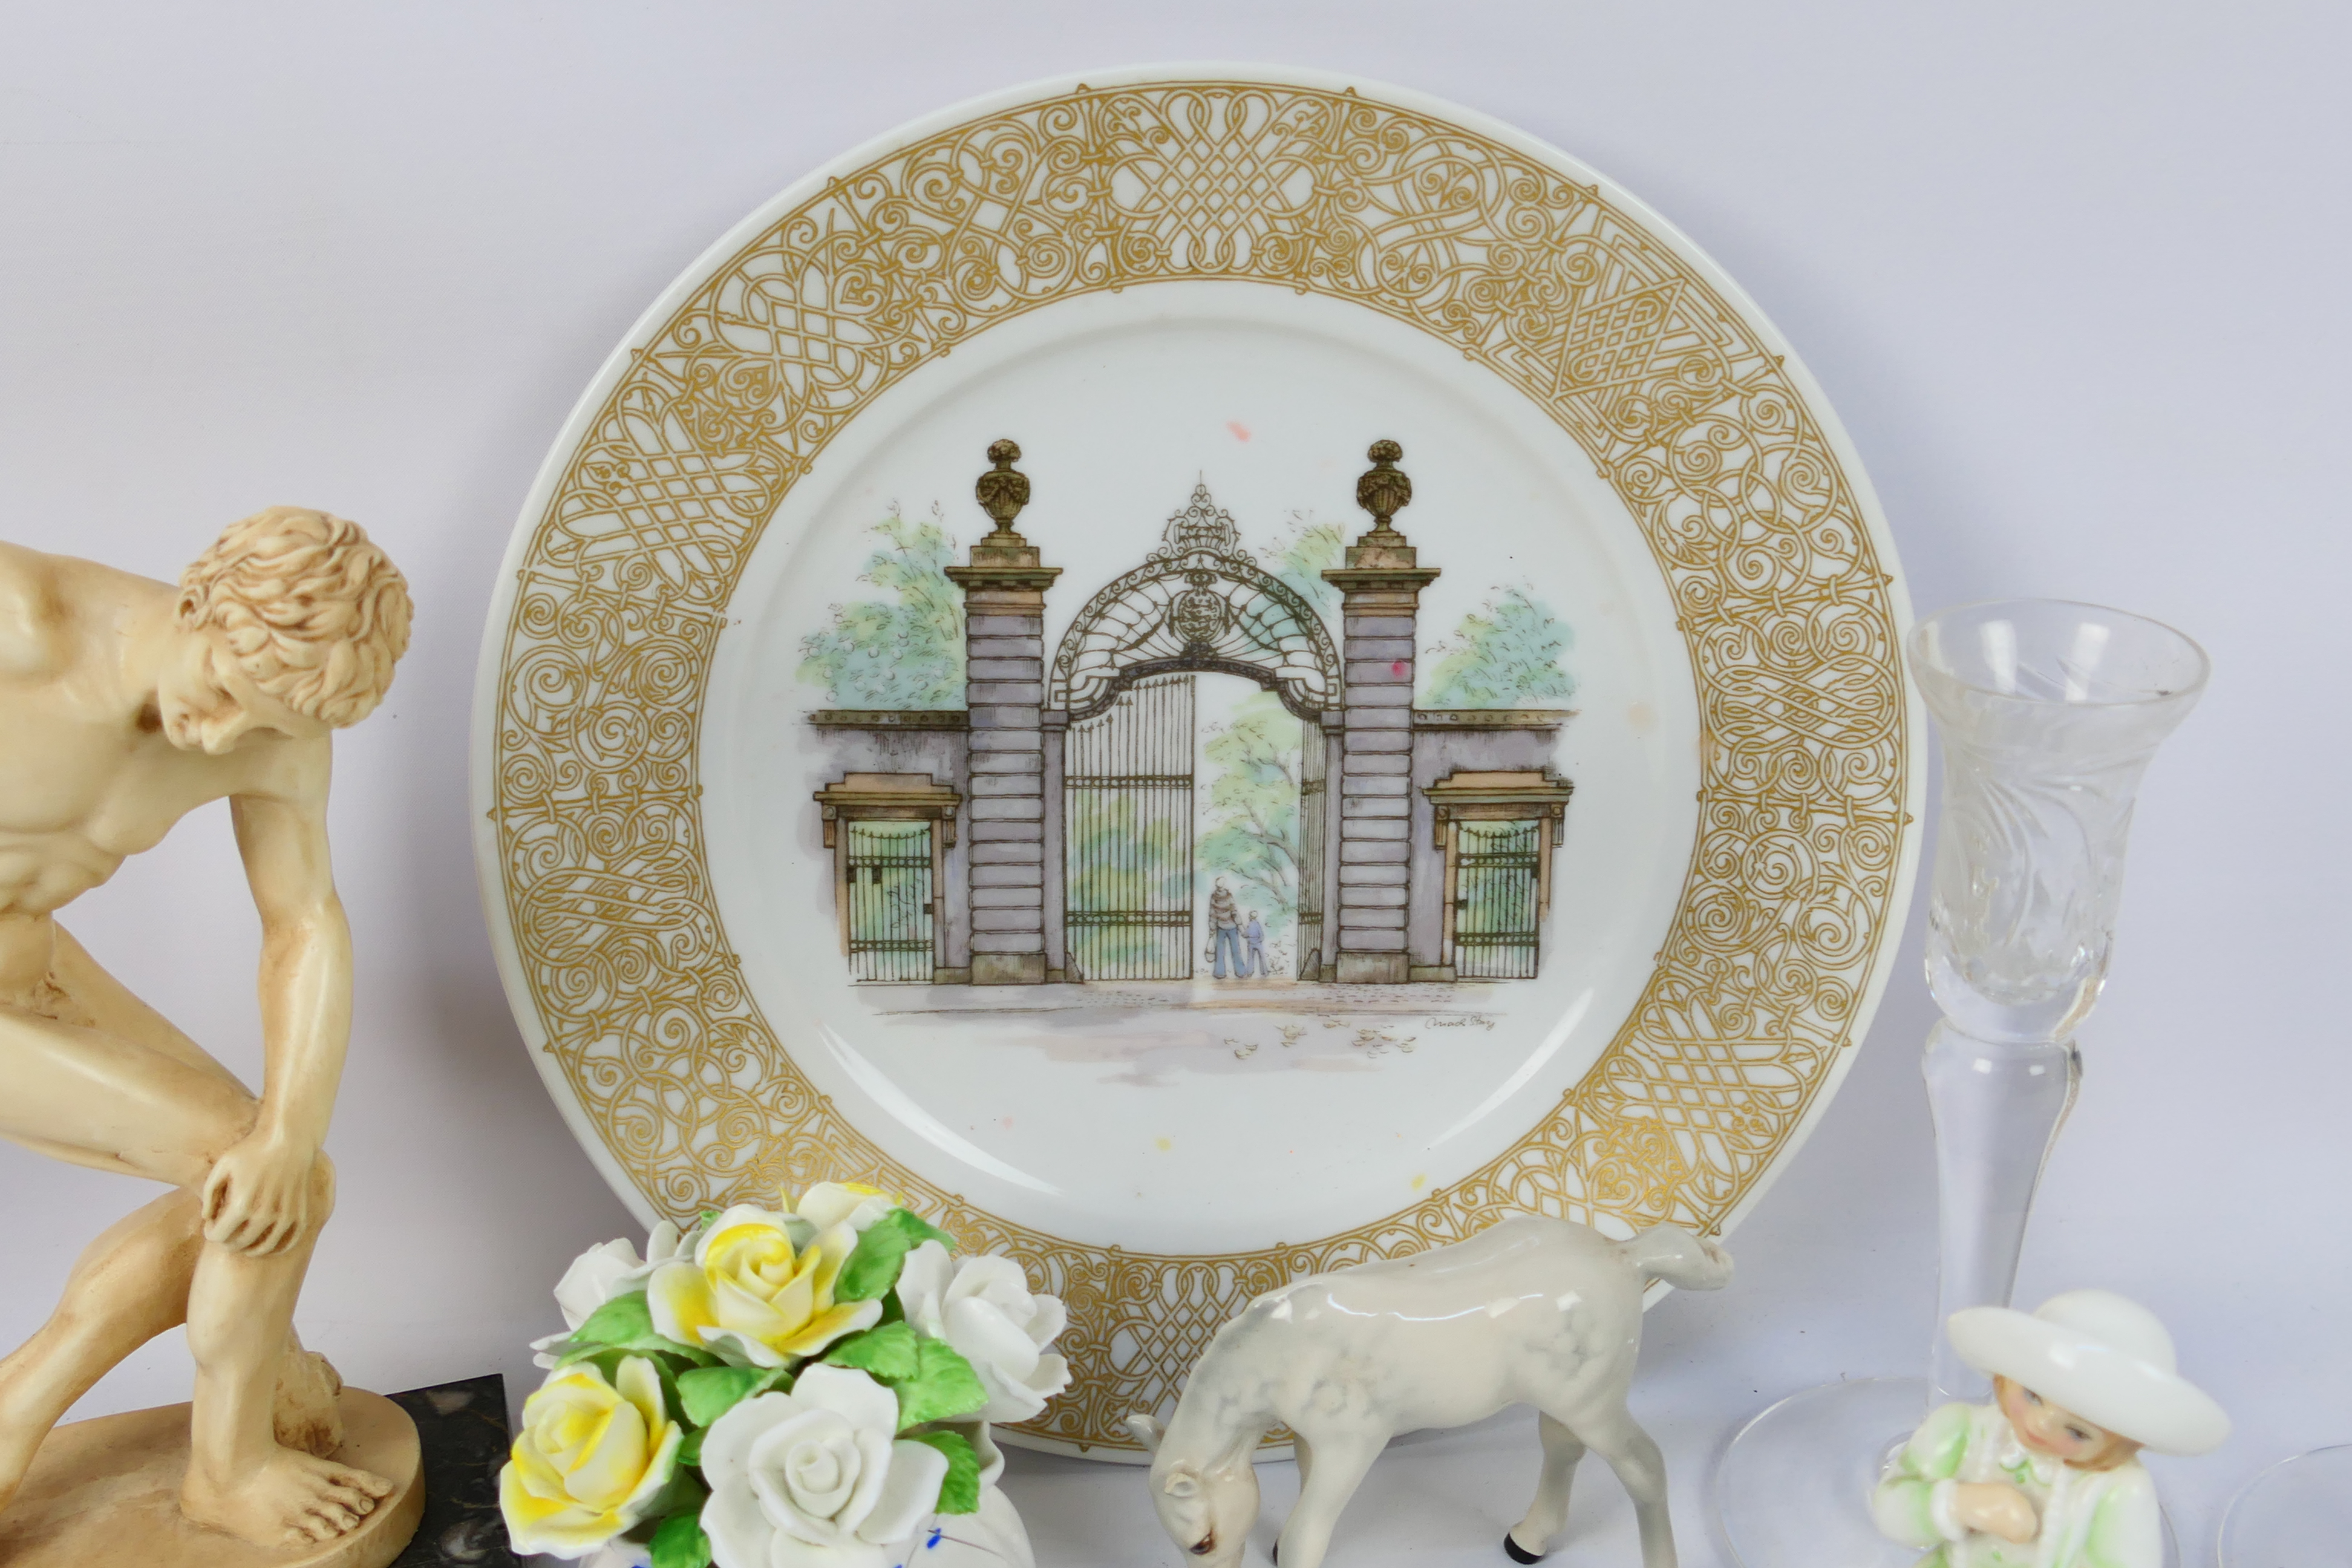 Lot to include a Royal Doulton foal figure, Royal Copenhagen plate, - Image 3 of 6